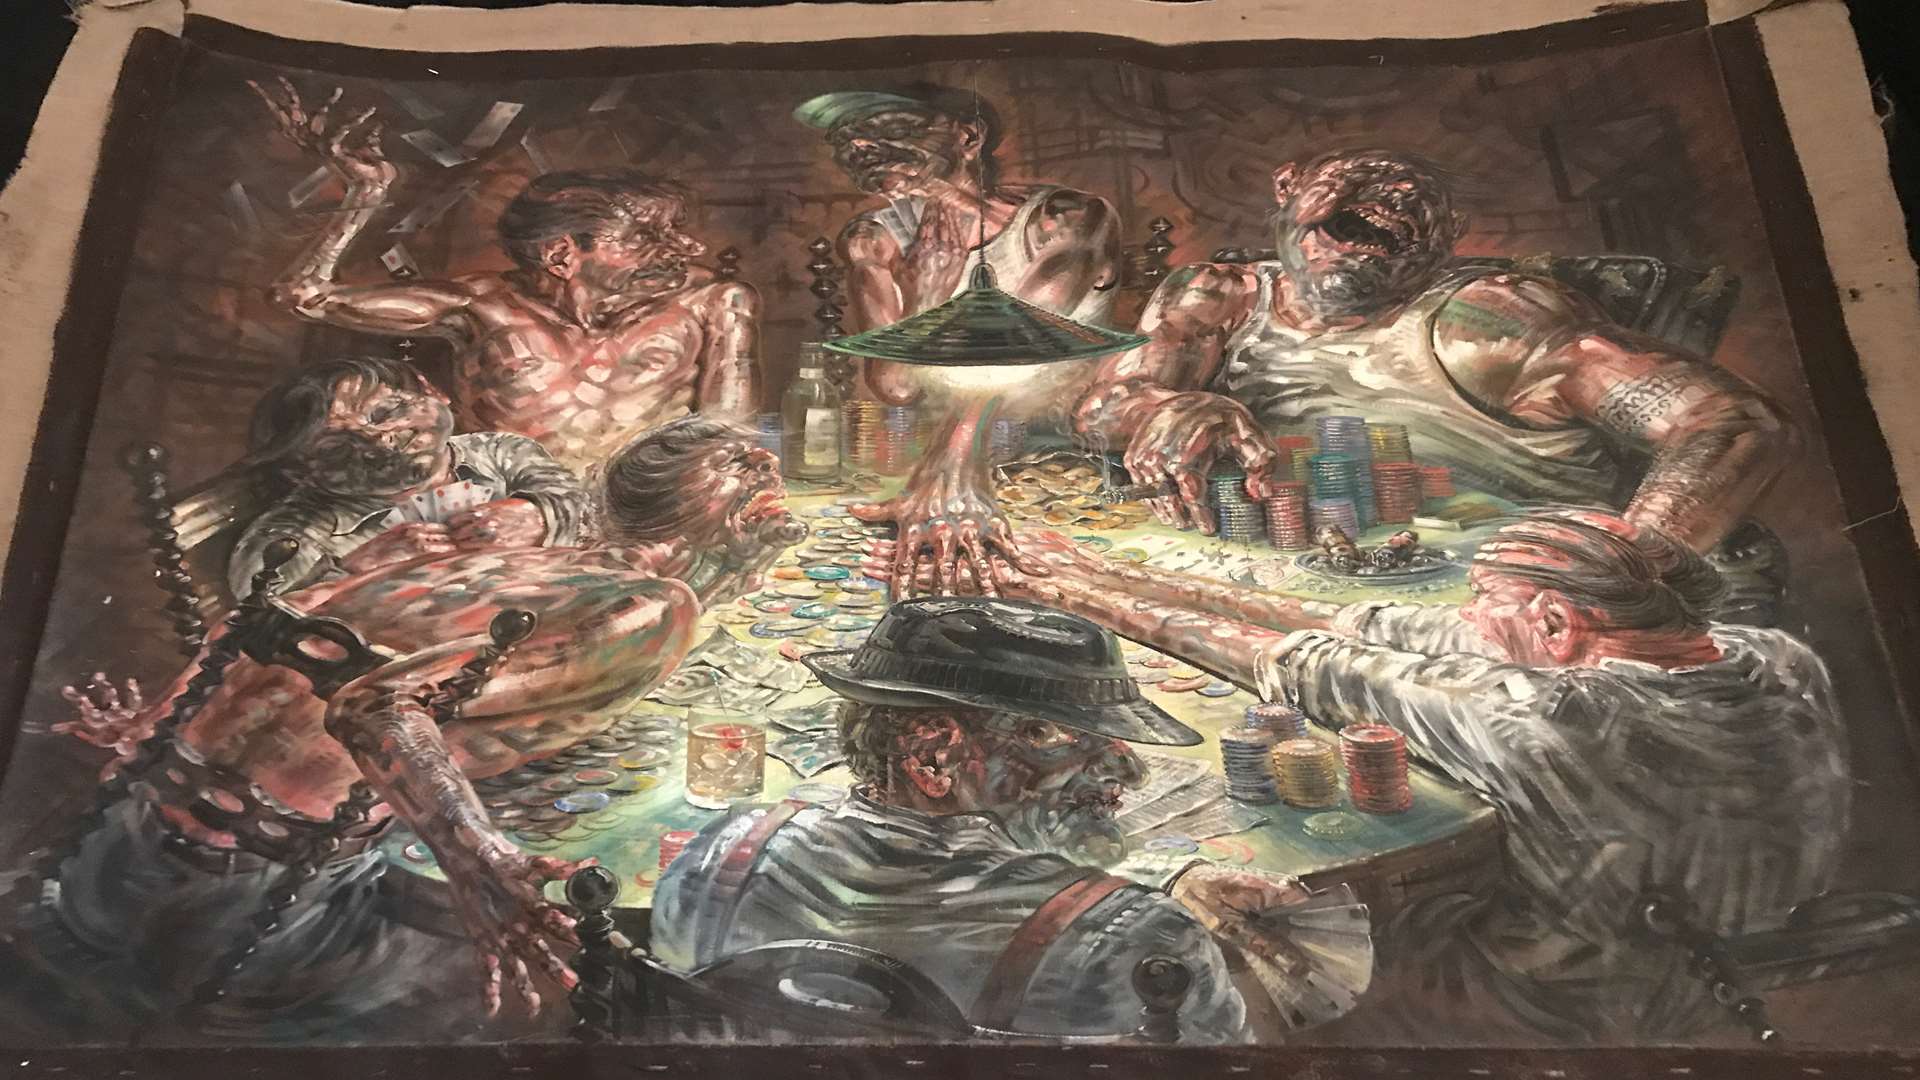 The painting depicting the devil playing cards. Picture: SWNS.com